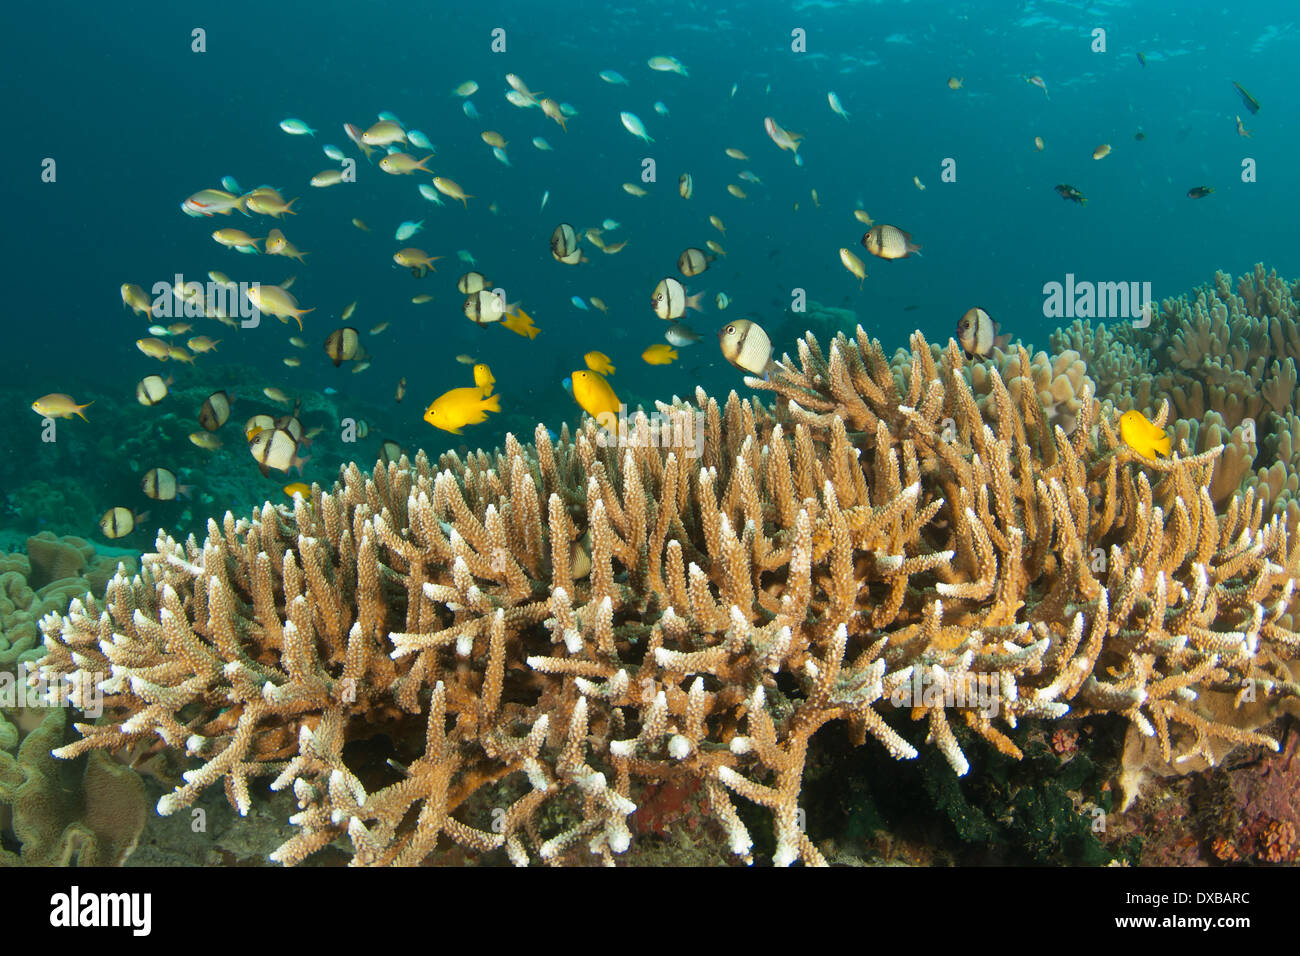 Schooling fish over staghorn coral, Gam Channel dive site, Gam Island, Raja Ampat, Indonesia Stock Photo